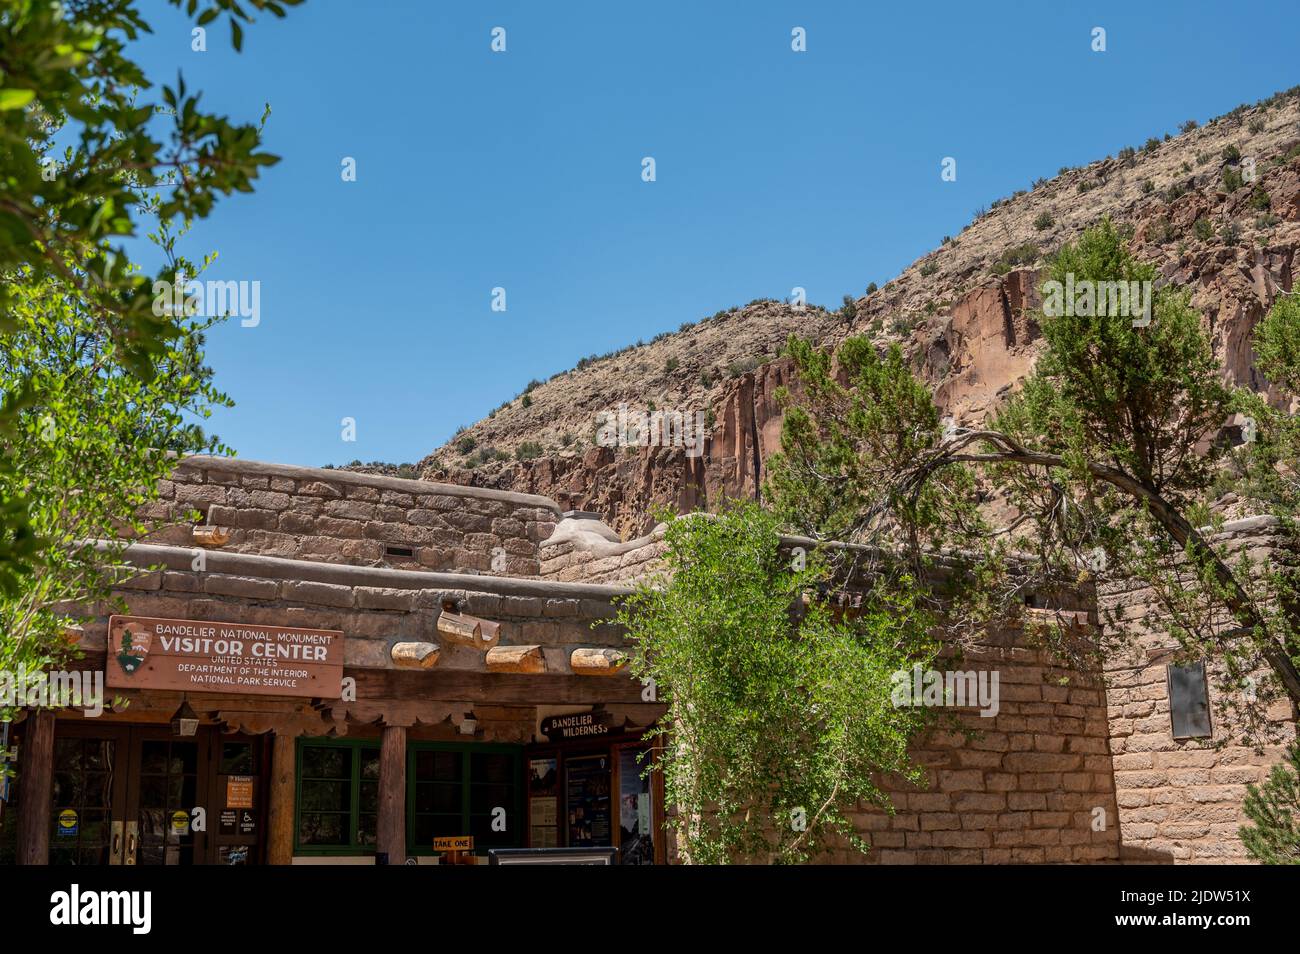 Bandelier National Monument Visitor Center, New Mexico, USA. Stock Photo